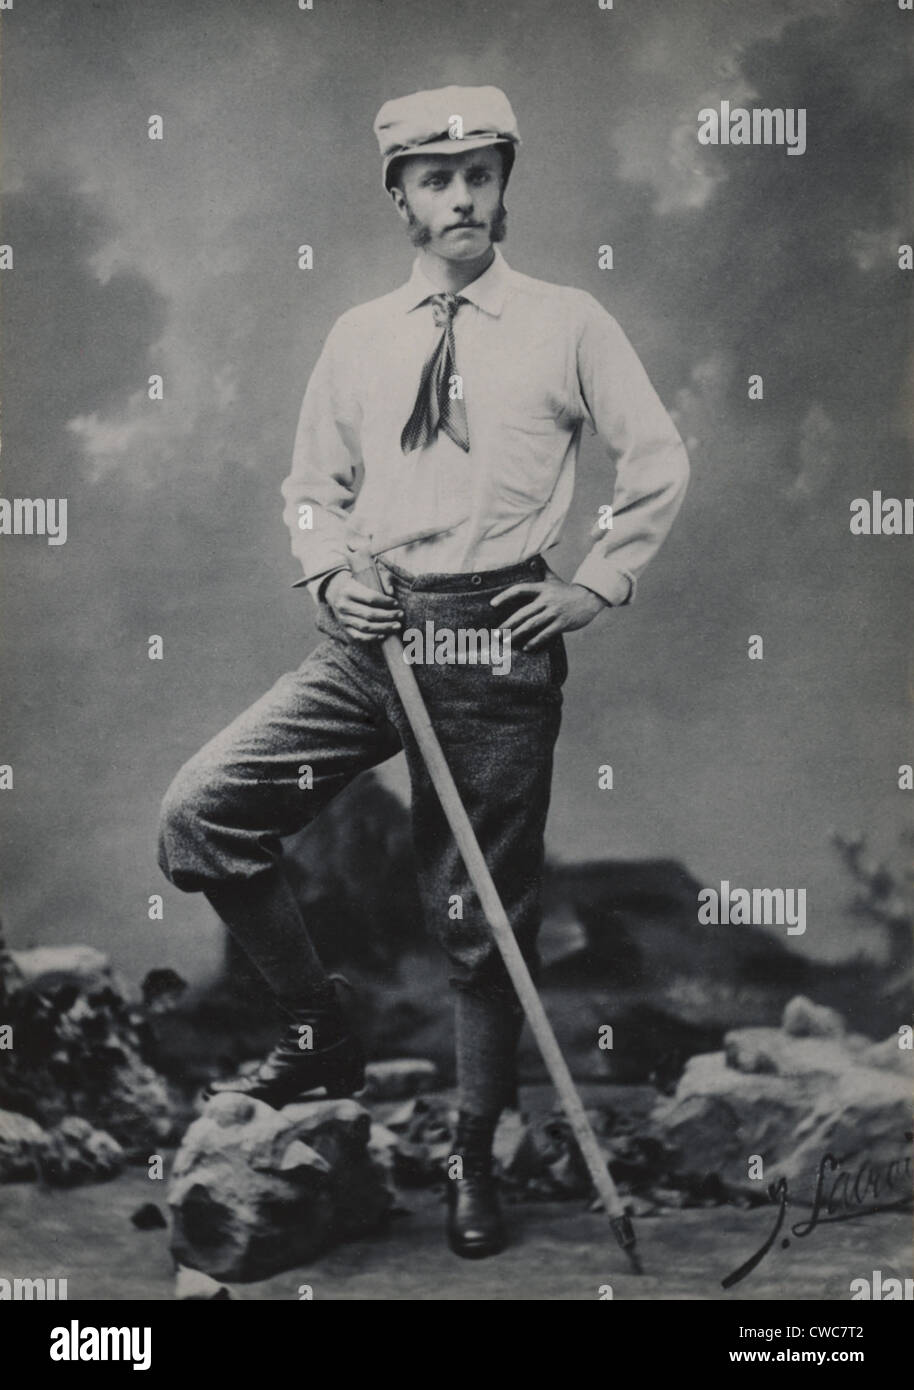 Young Theodore Roosevelt posing as a mountain climber in his late teens or early twenties. Ca. 1880s studio portrait. Stock Photo